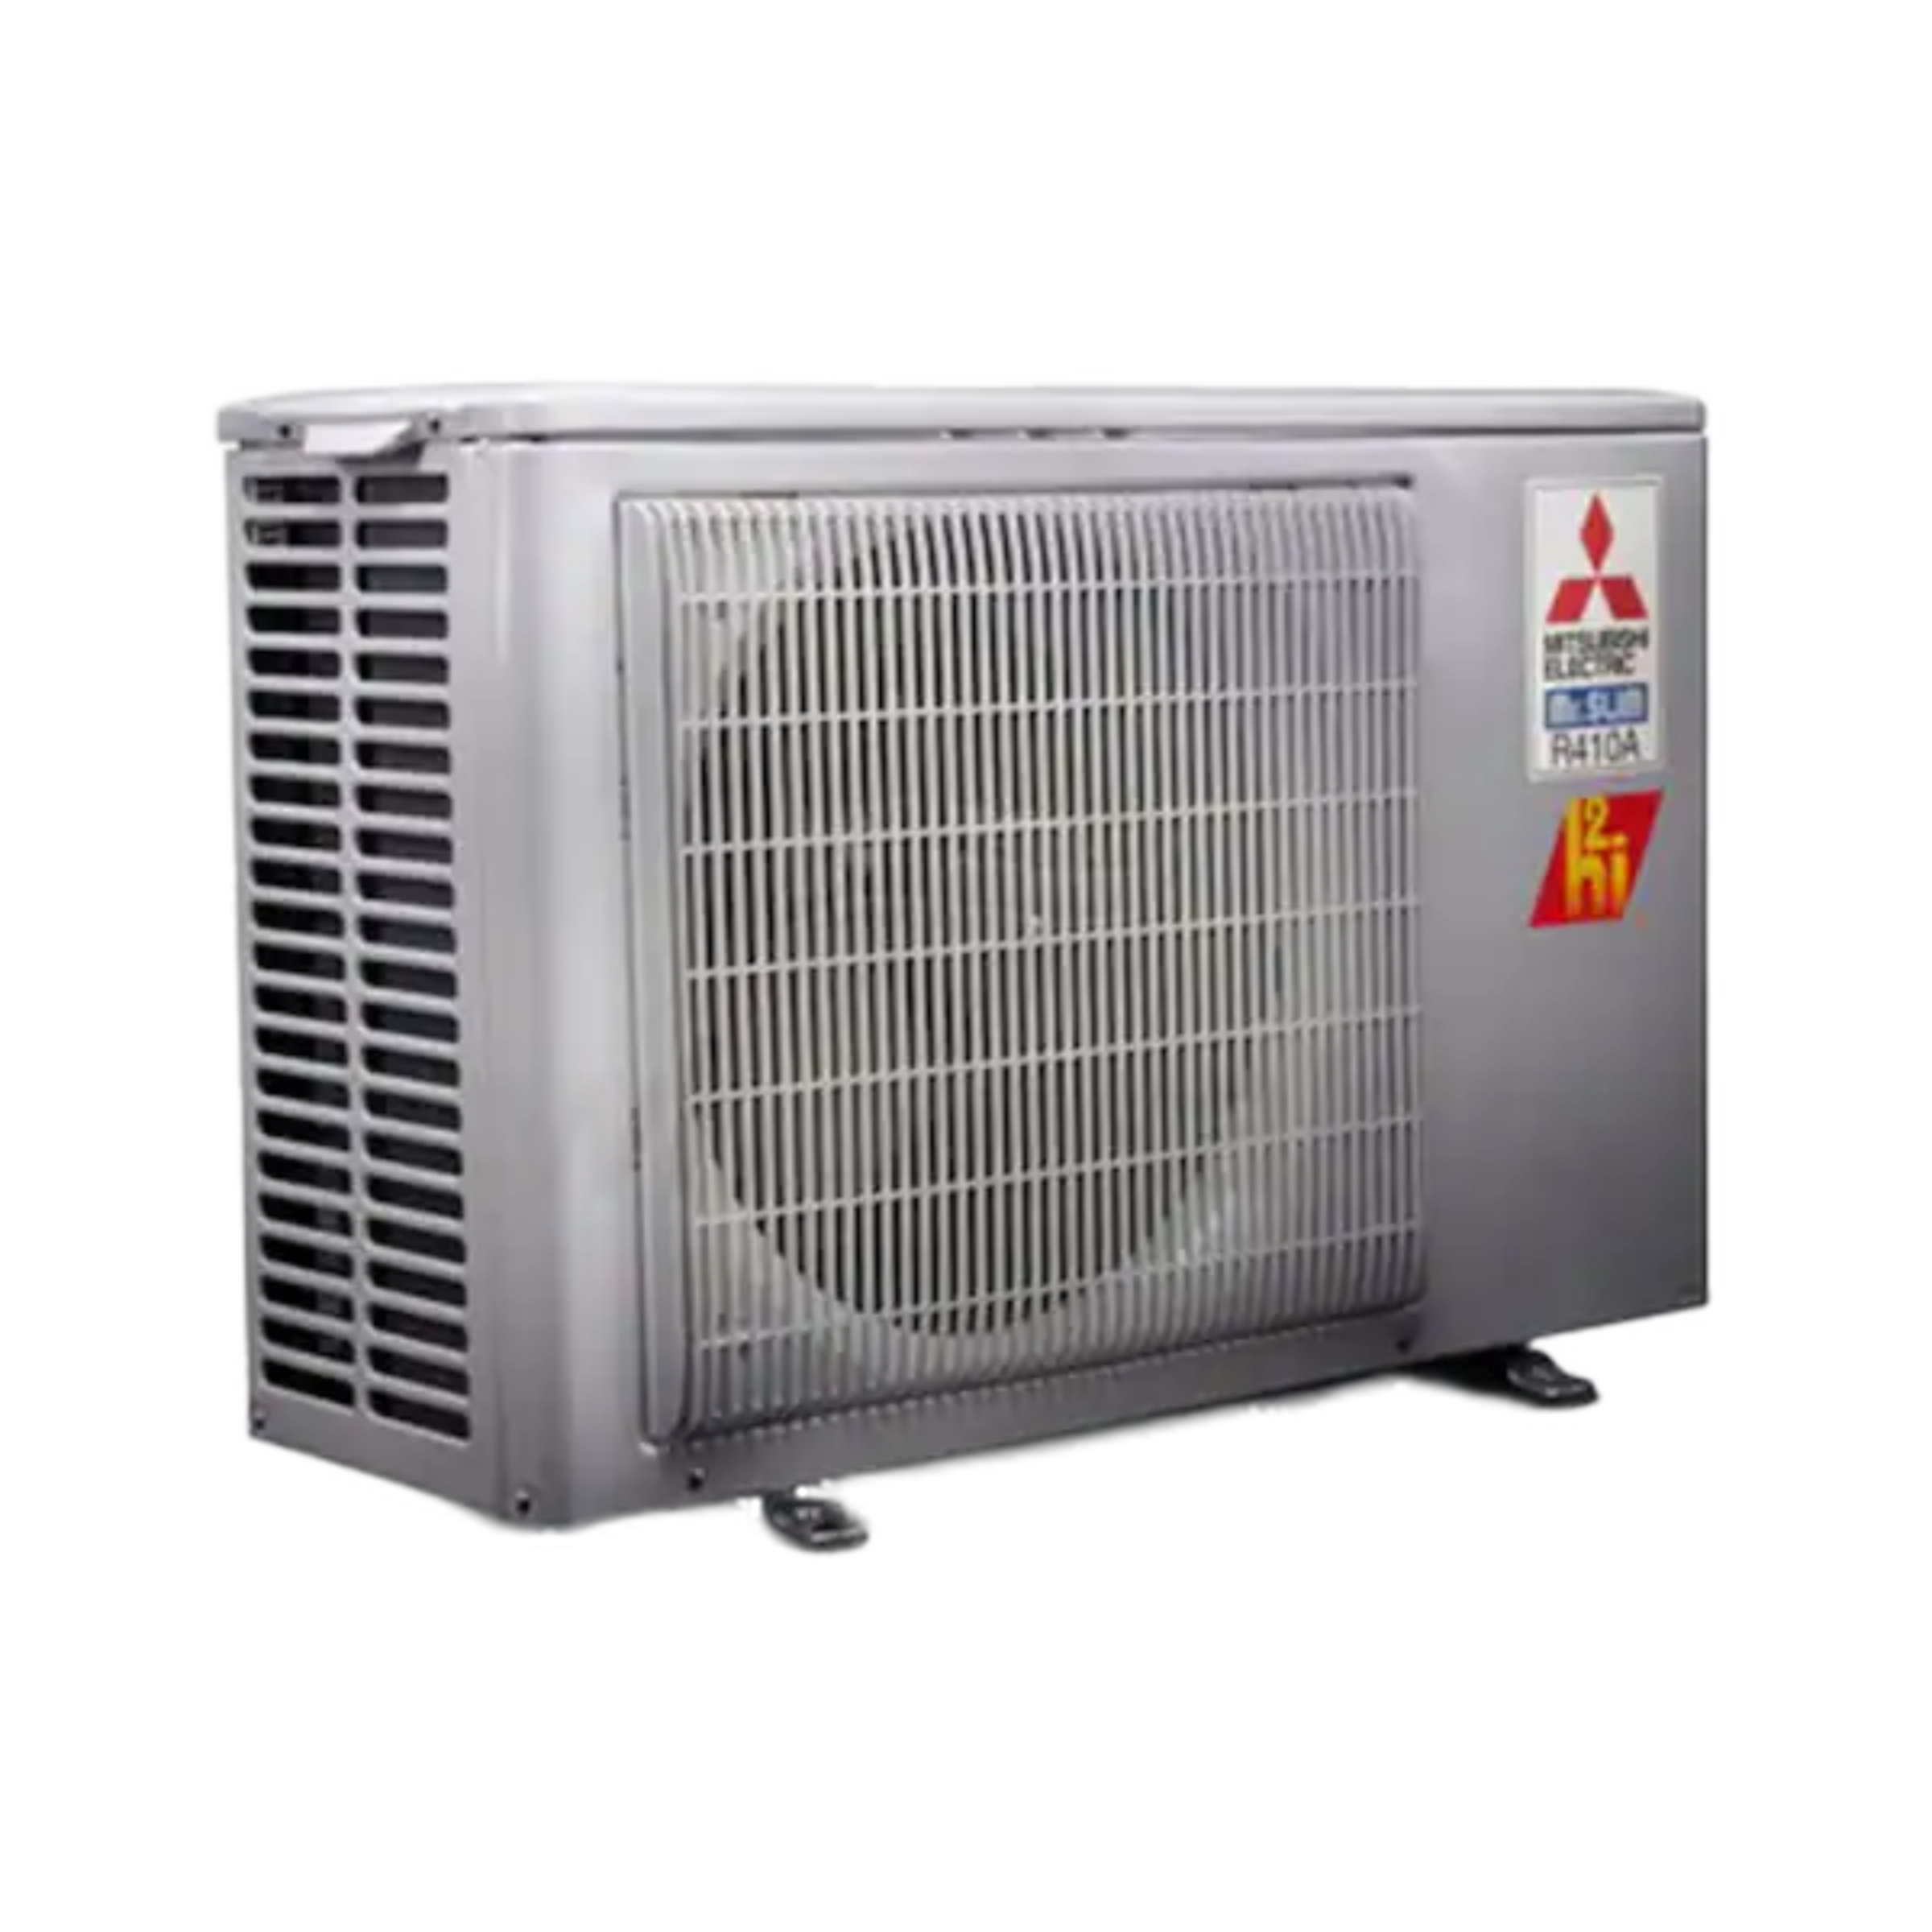 Mitsubishi FH-Series  30.5 SEER Single-Zone Ductless Split System Wall Mounted Heat Pump Air Conditioner  9000  BTU, 230V, R-410A